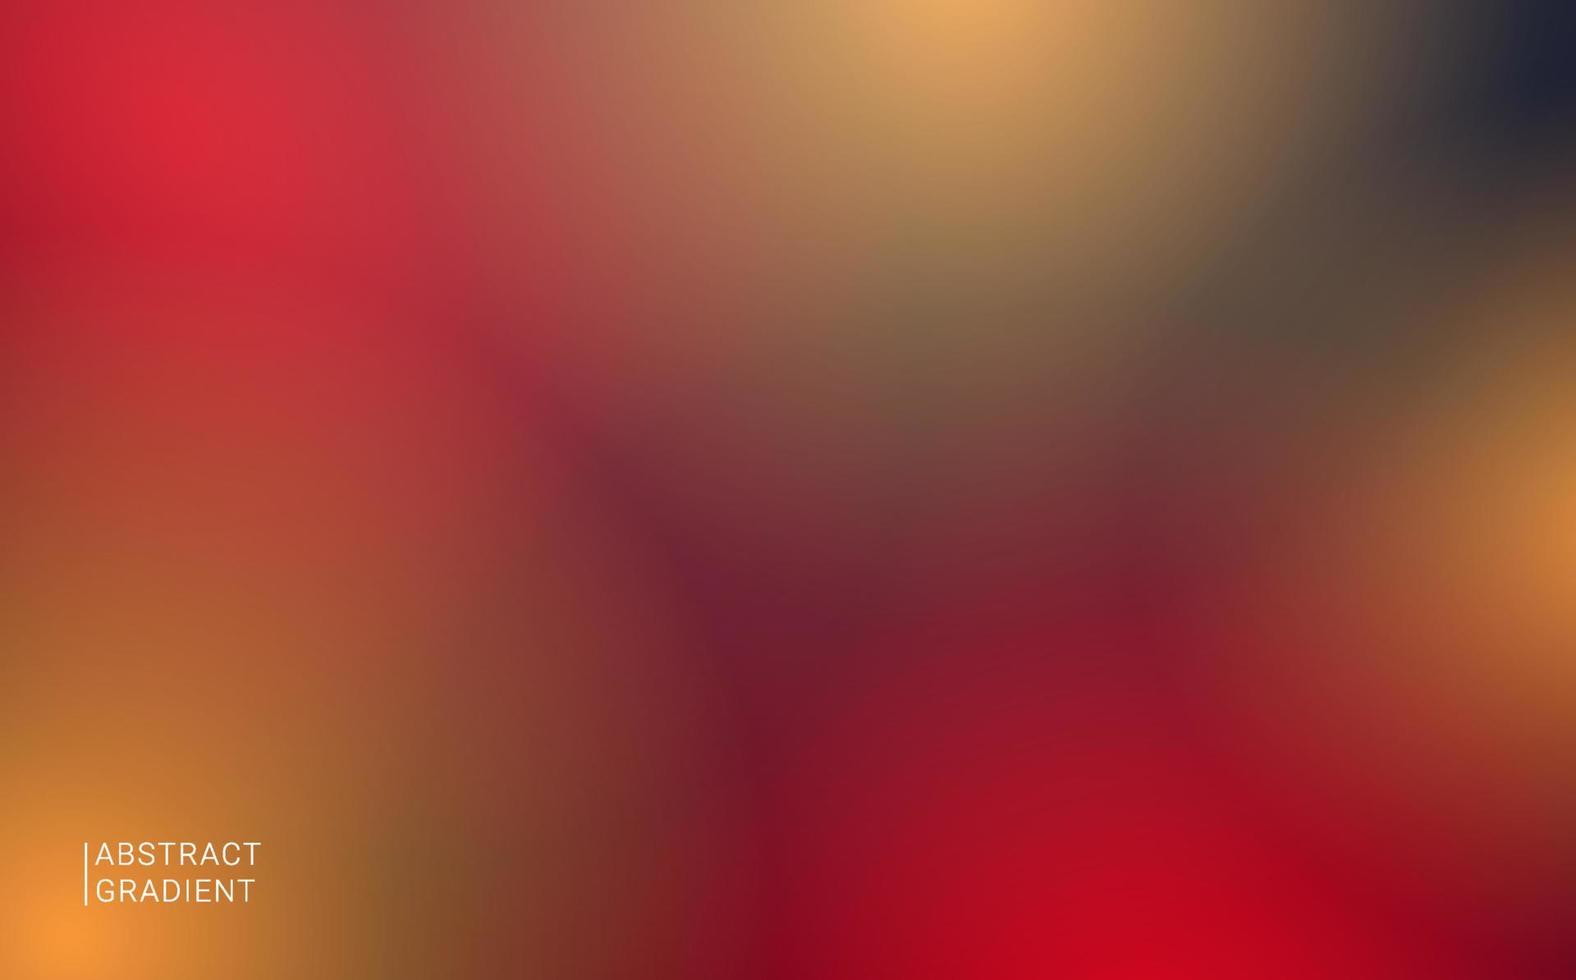 Abstract blurred vivid red yellow softly gradient background design vector